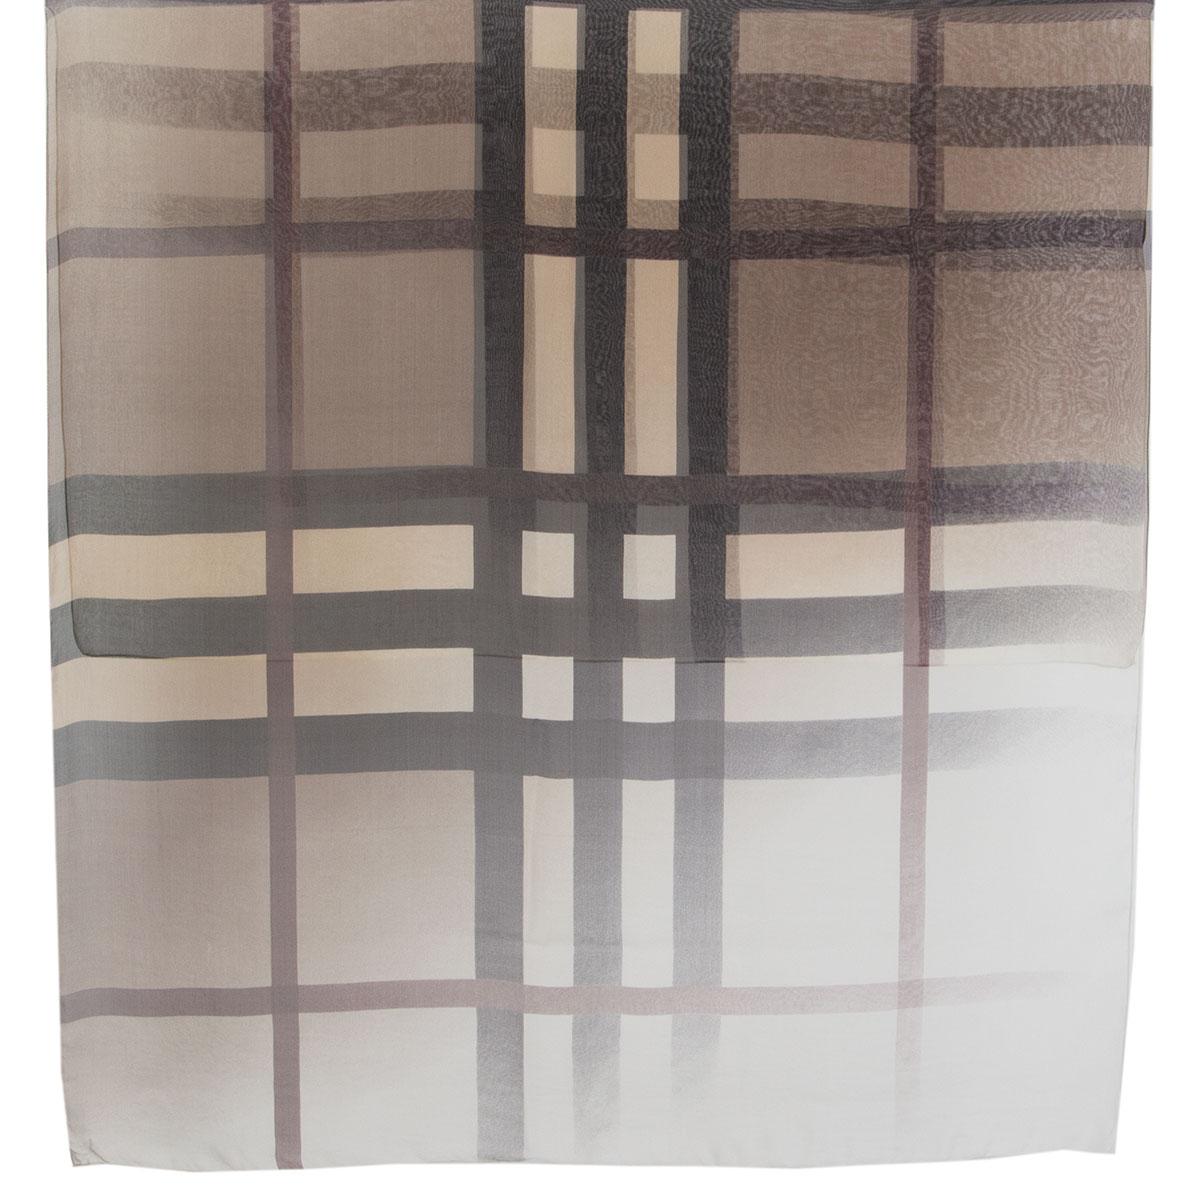 100% authentic Burberry check scarf in sheer brown, black, white and burgundy silk (100% - missing tag). Has been worn and is in excellent condition. 

Width 100cm (39in)
Length 90cm (35.1in)

All our listings include only the listed item unless